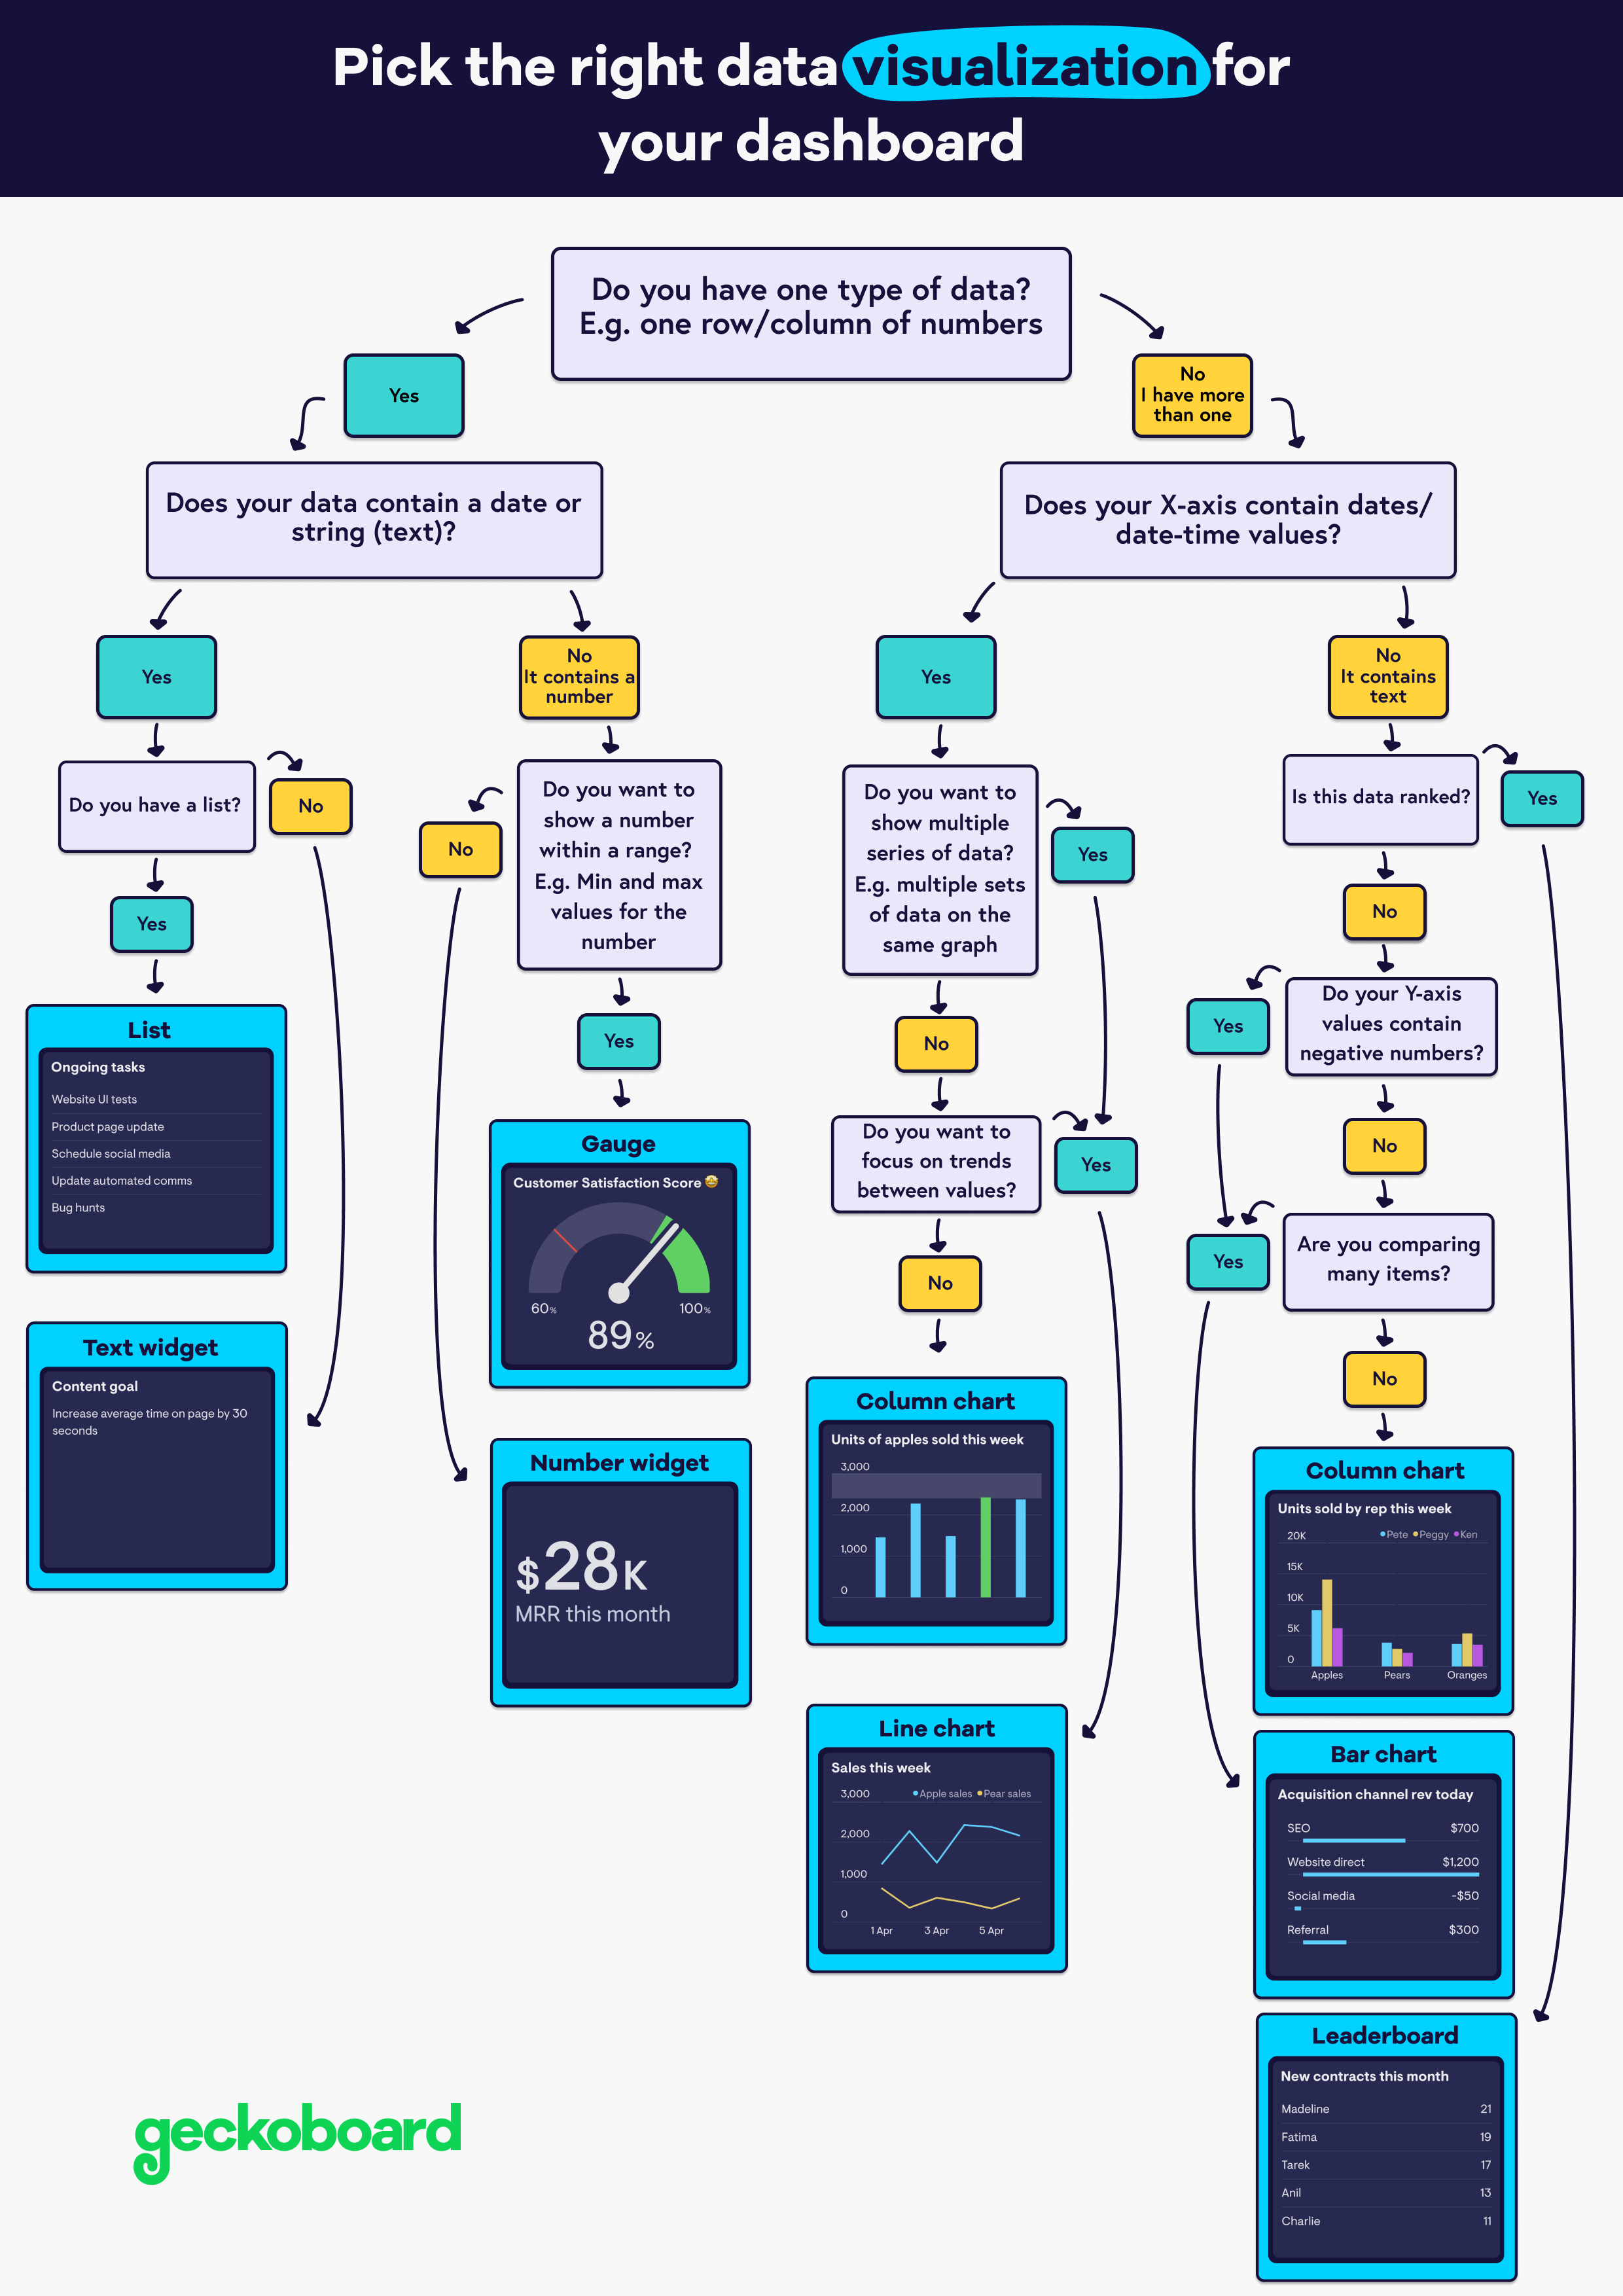 Decision tree that shows you how to select the right data visualization.